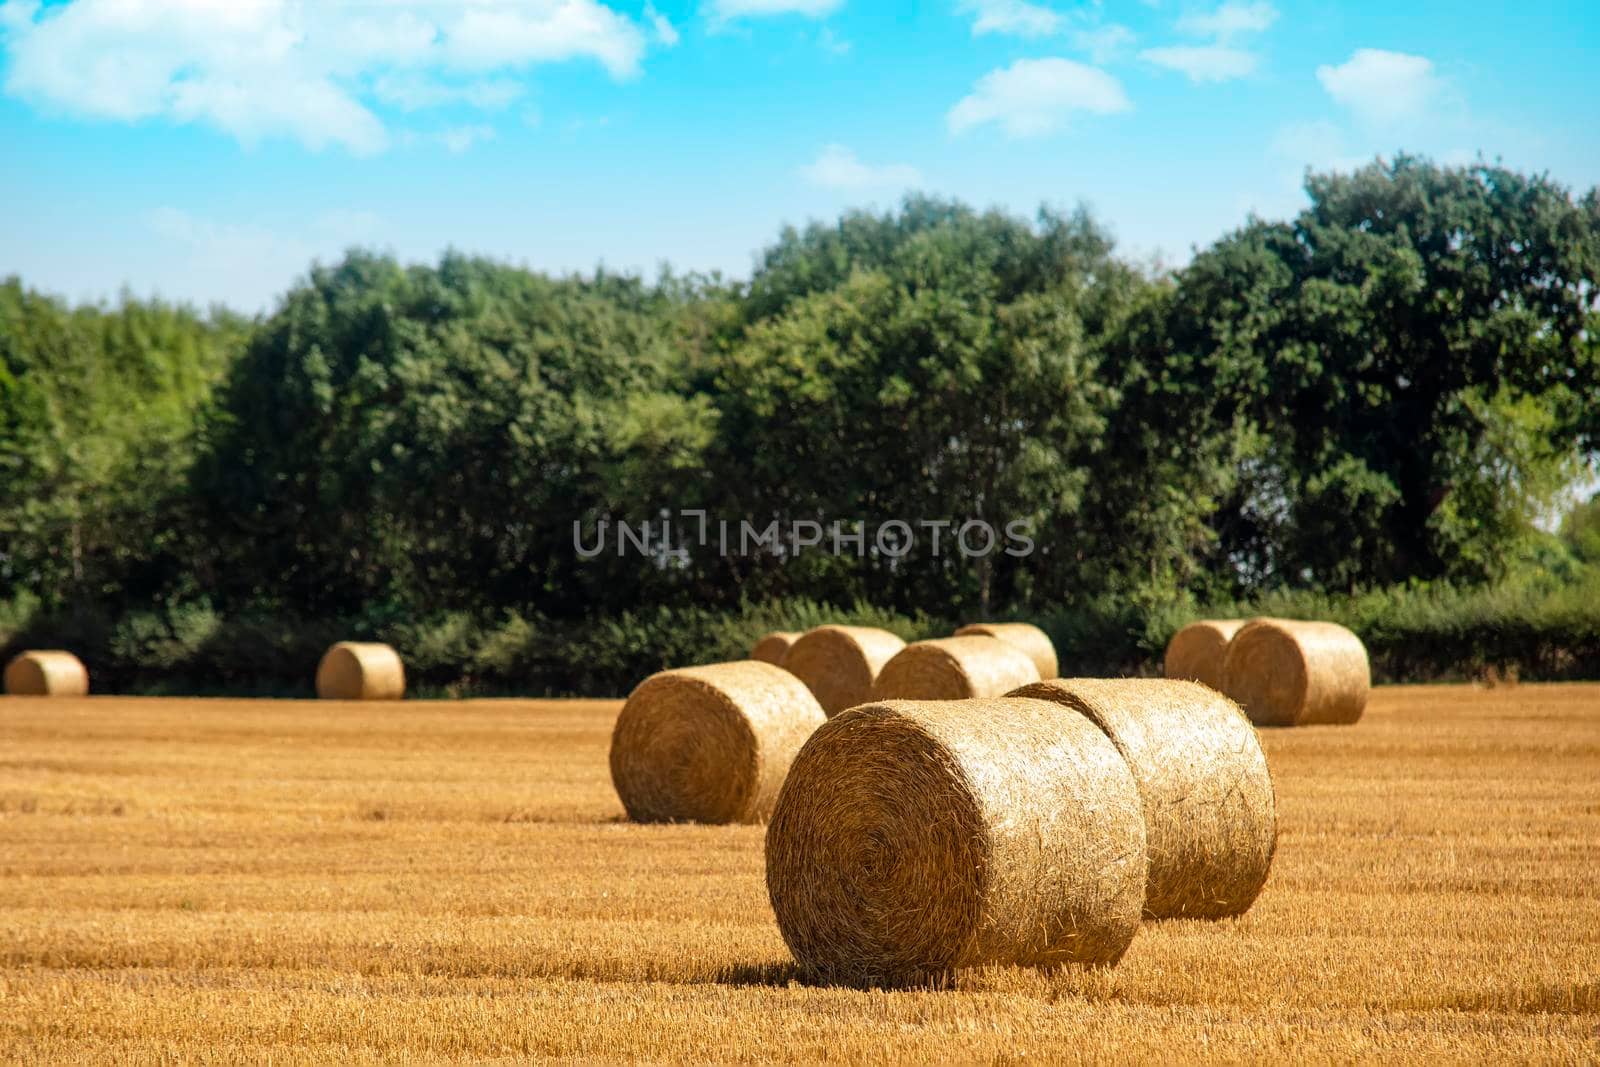 Hay bale and straw in the field. English Rural landscape. Wheat yellow golden harvest in summer. Countryside natural landscape. Grain crop, harvesting